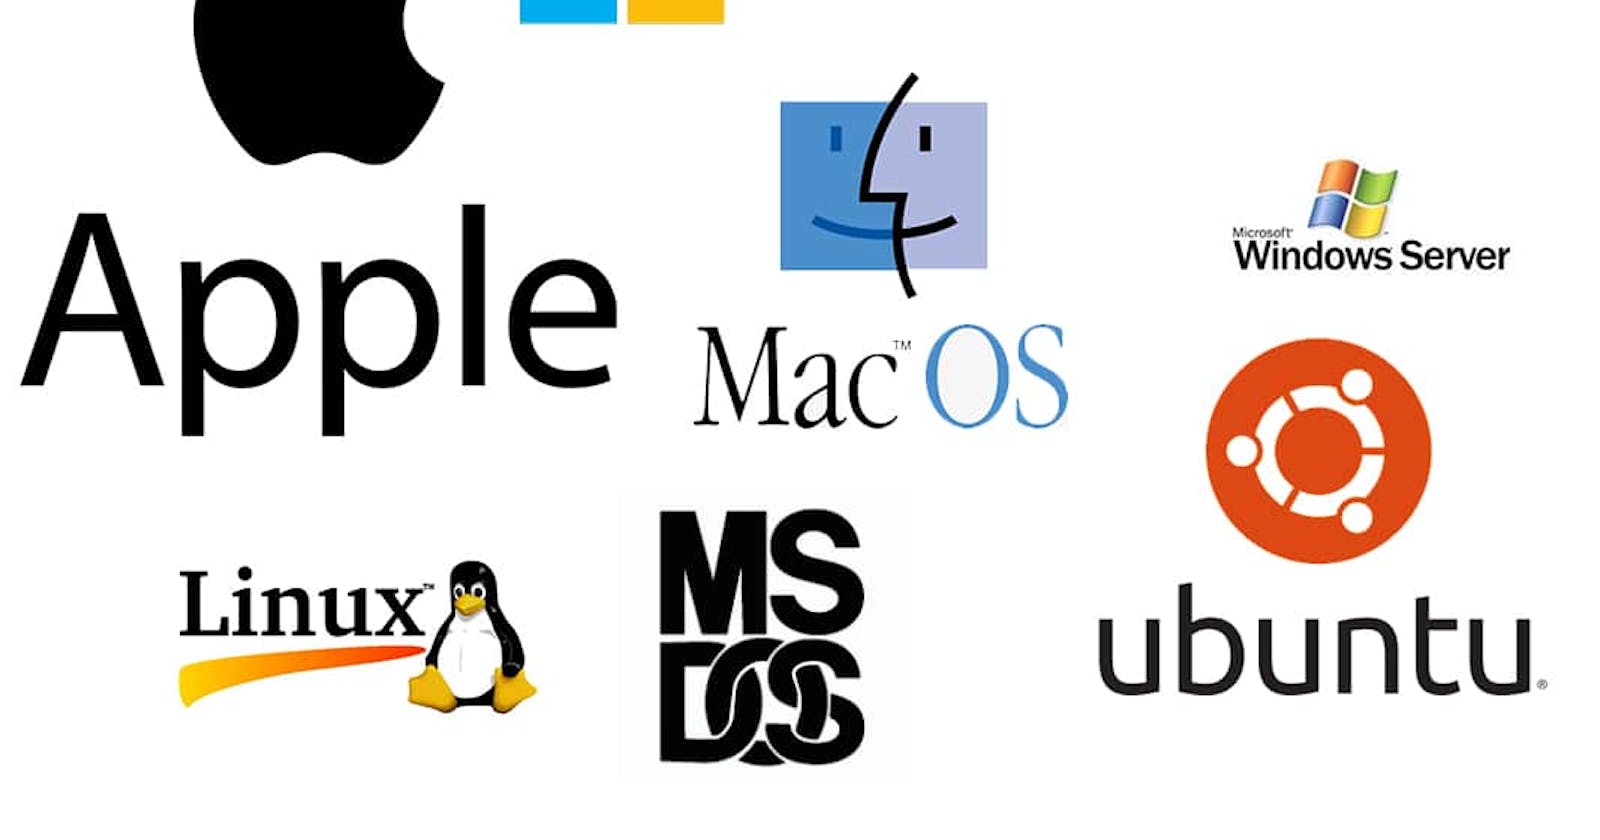 THE OPERATING SYSTEM